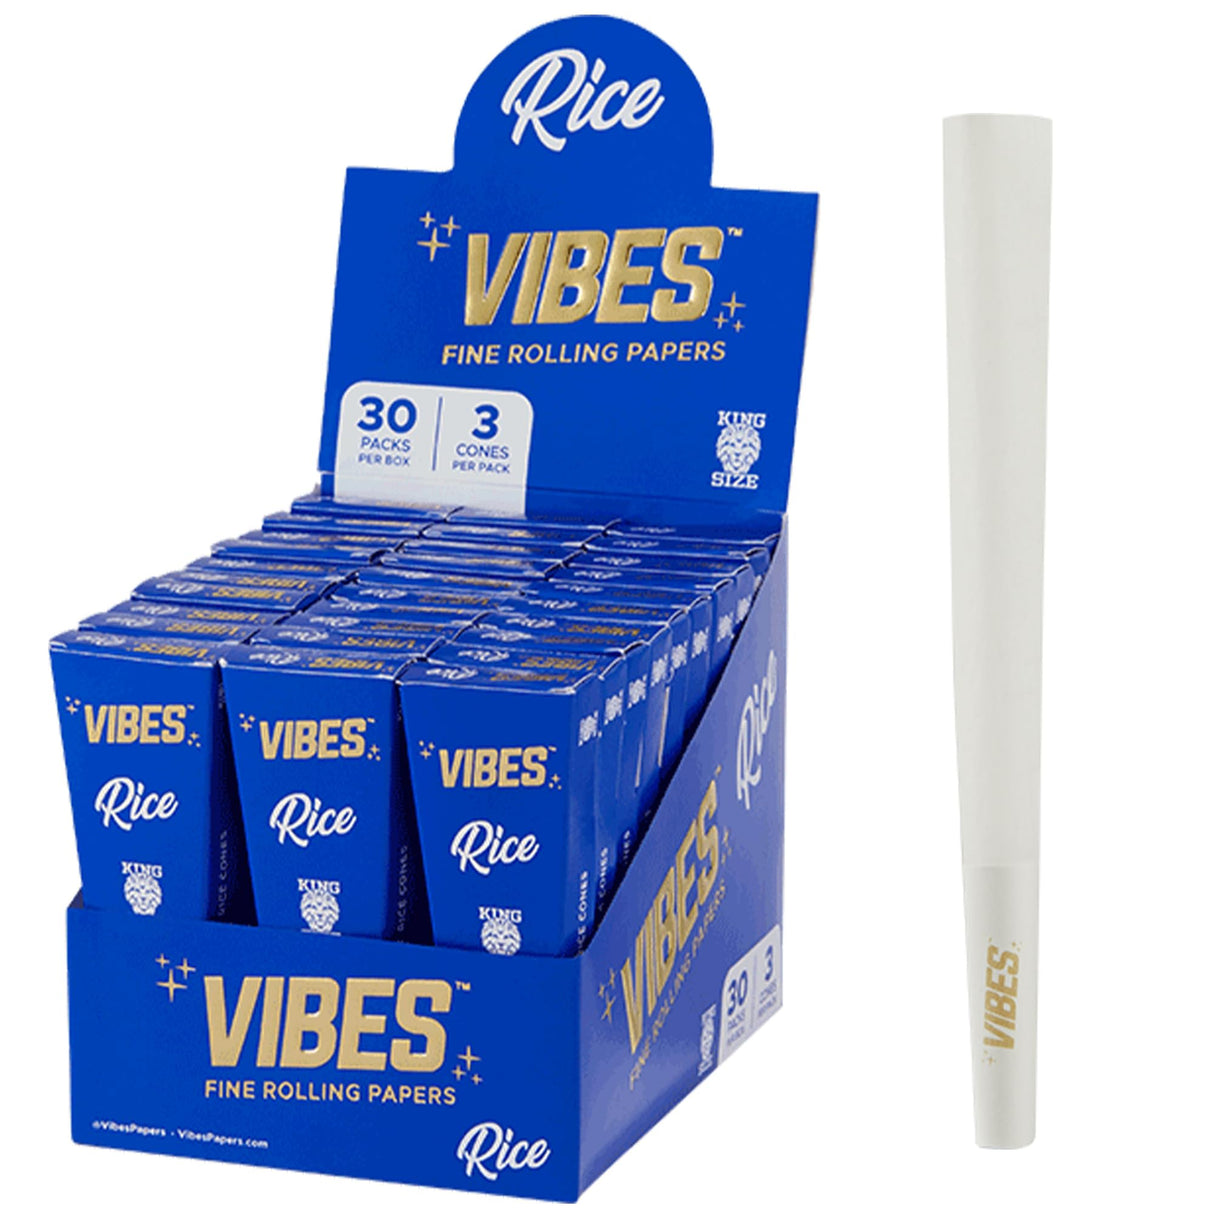 Vibes Cones Box in blue, displaying 1.25" rice rolling papers, side view with a single cone